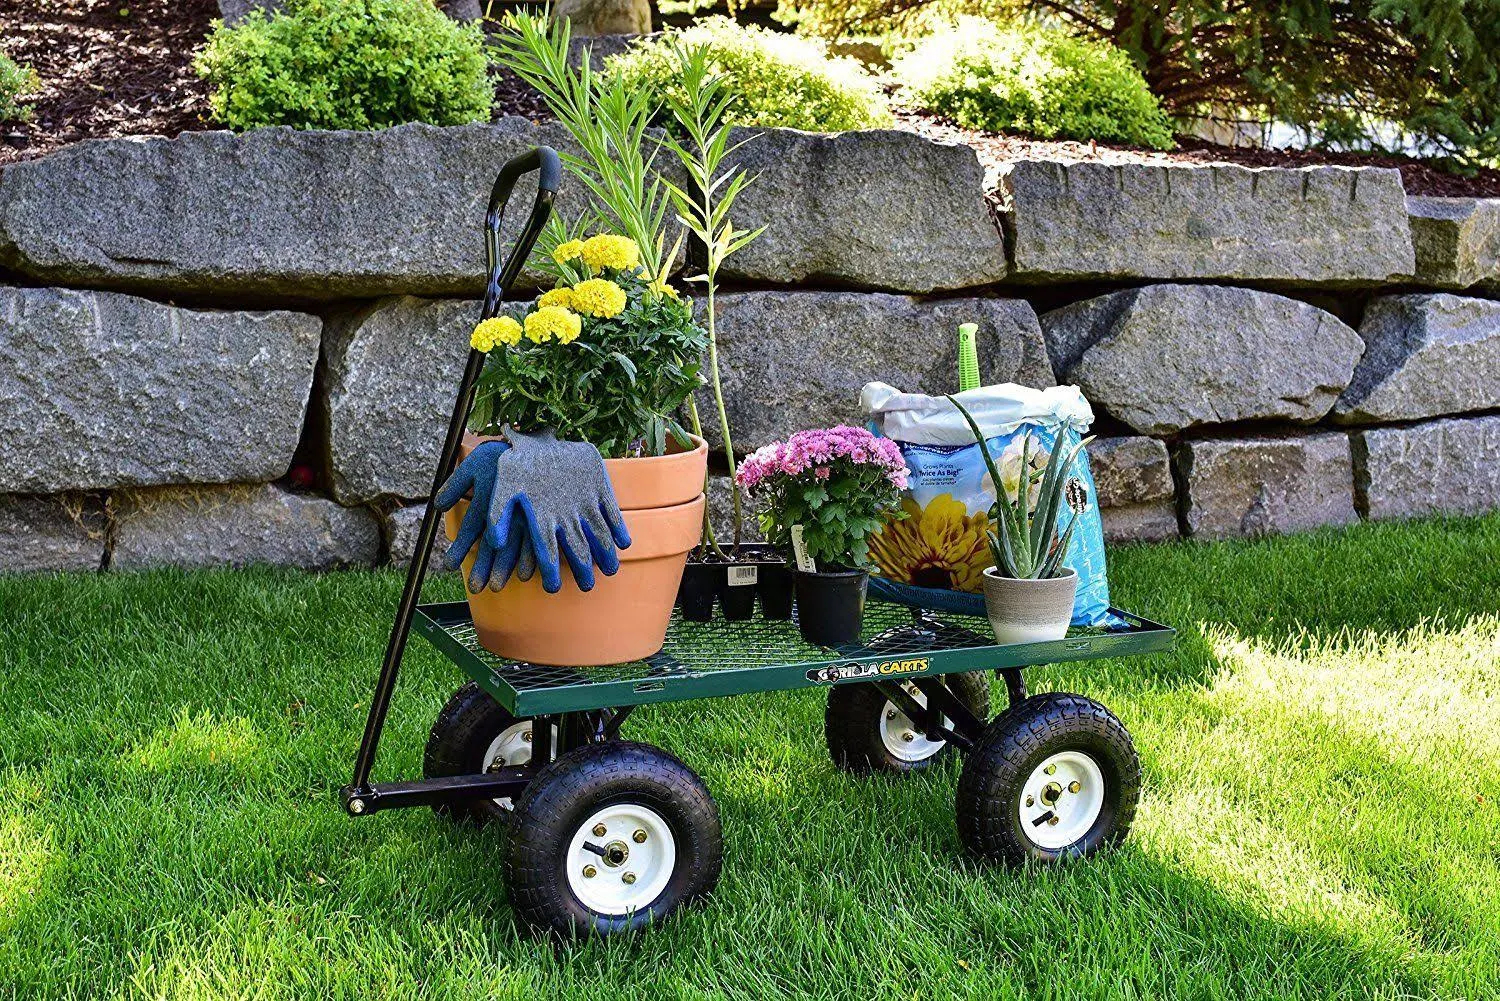 Gorilla Carts Steel Garden Cart with Removable Sides, Green, 400 lb